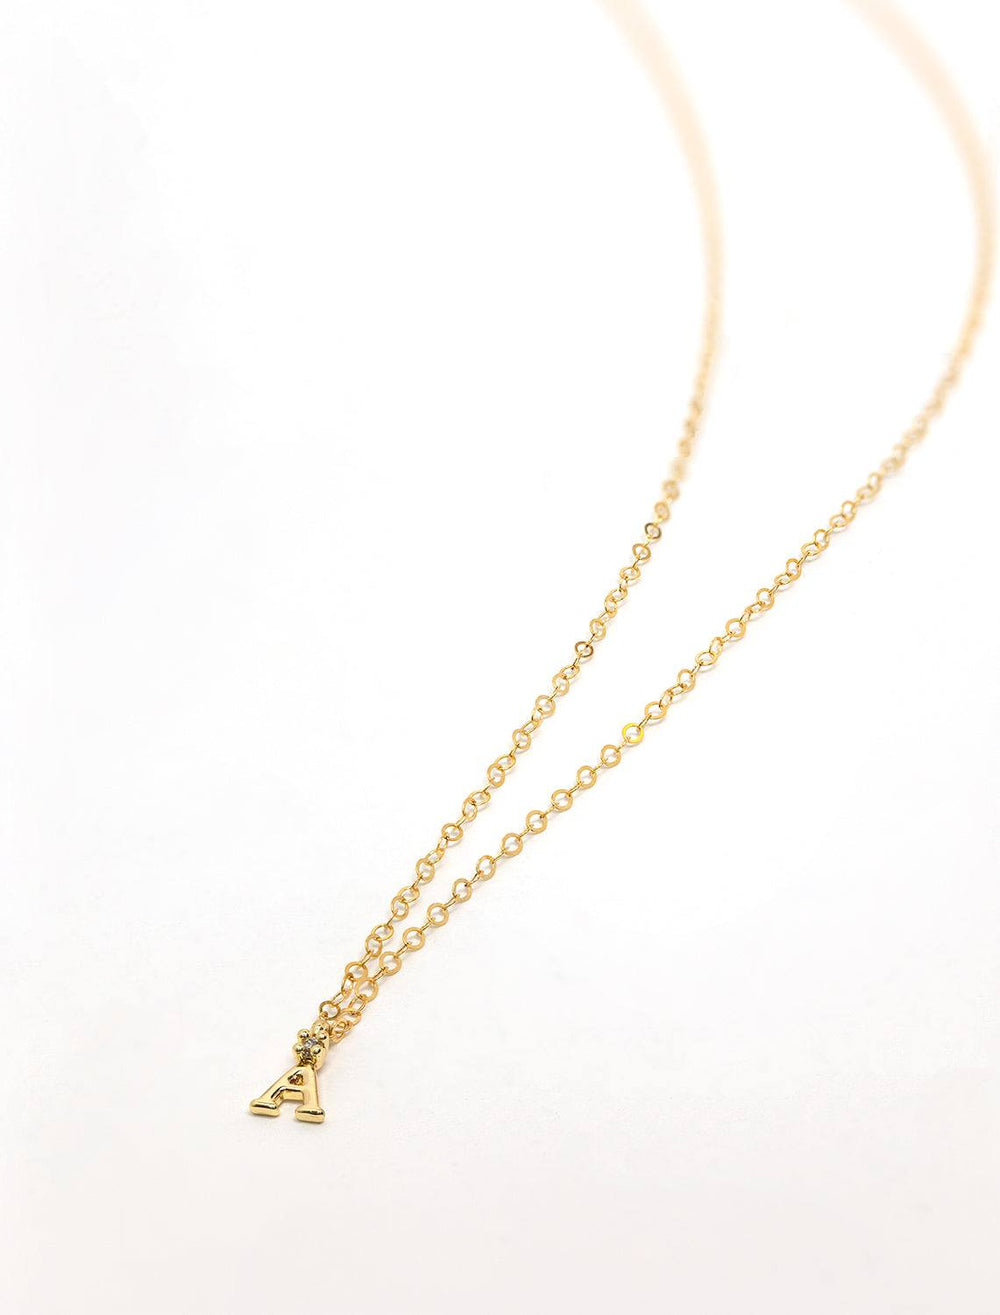 Marit Rae initial and cz necklace in gold | A - Twigs